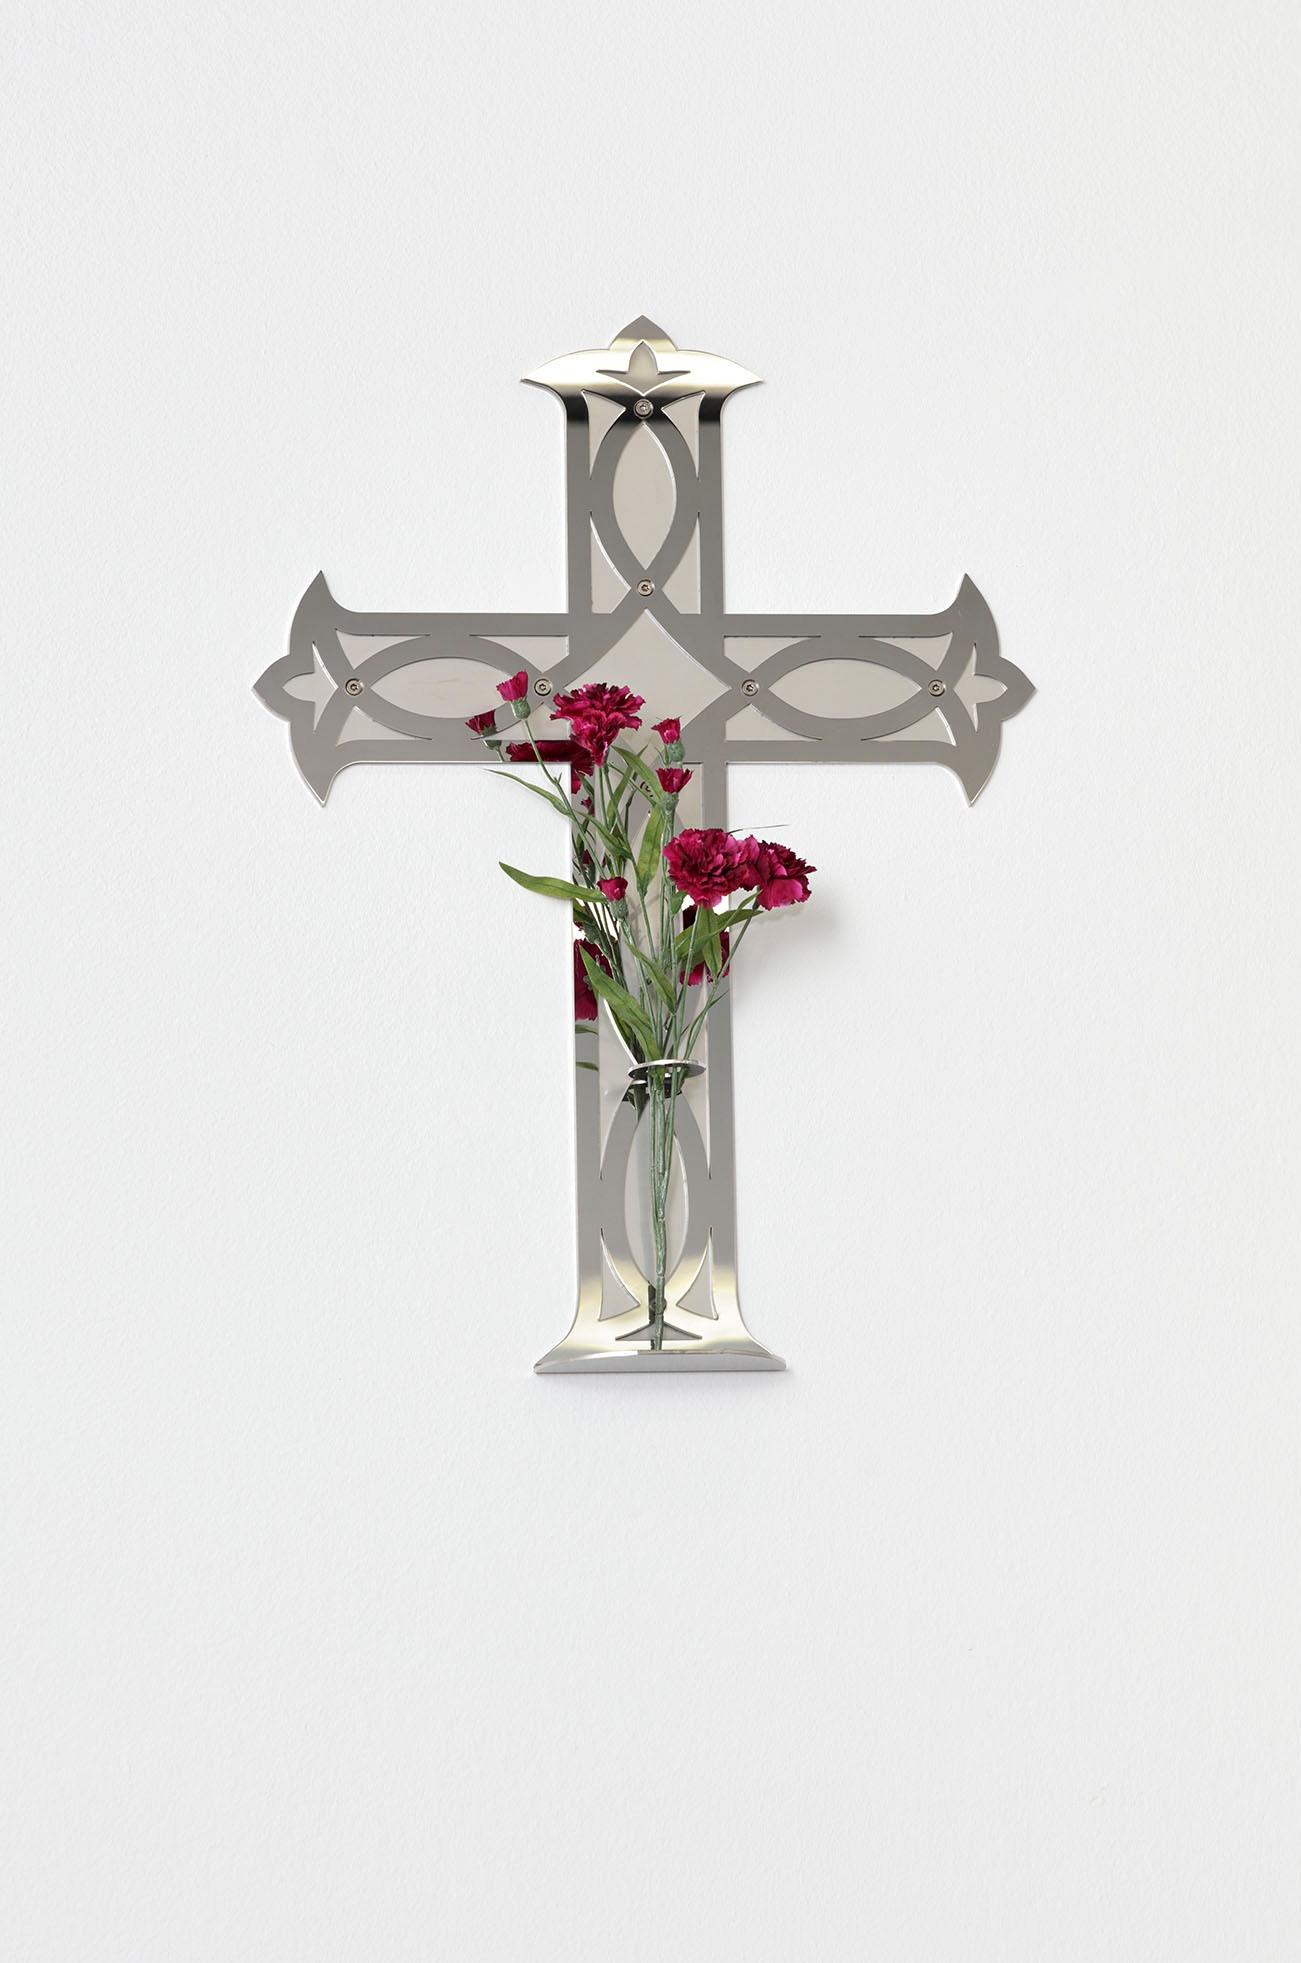 What Do You Believe?, 2021plastic flowers, polished and unpolished stainless steel69 x 51 x 17 cm